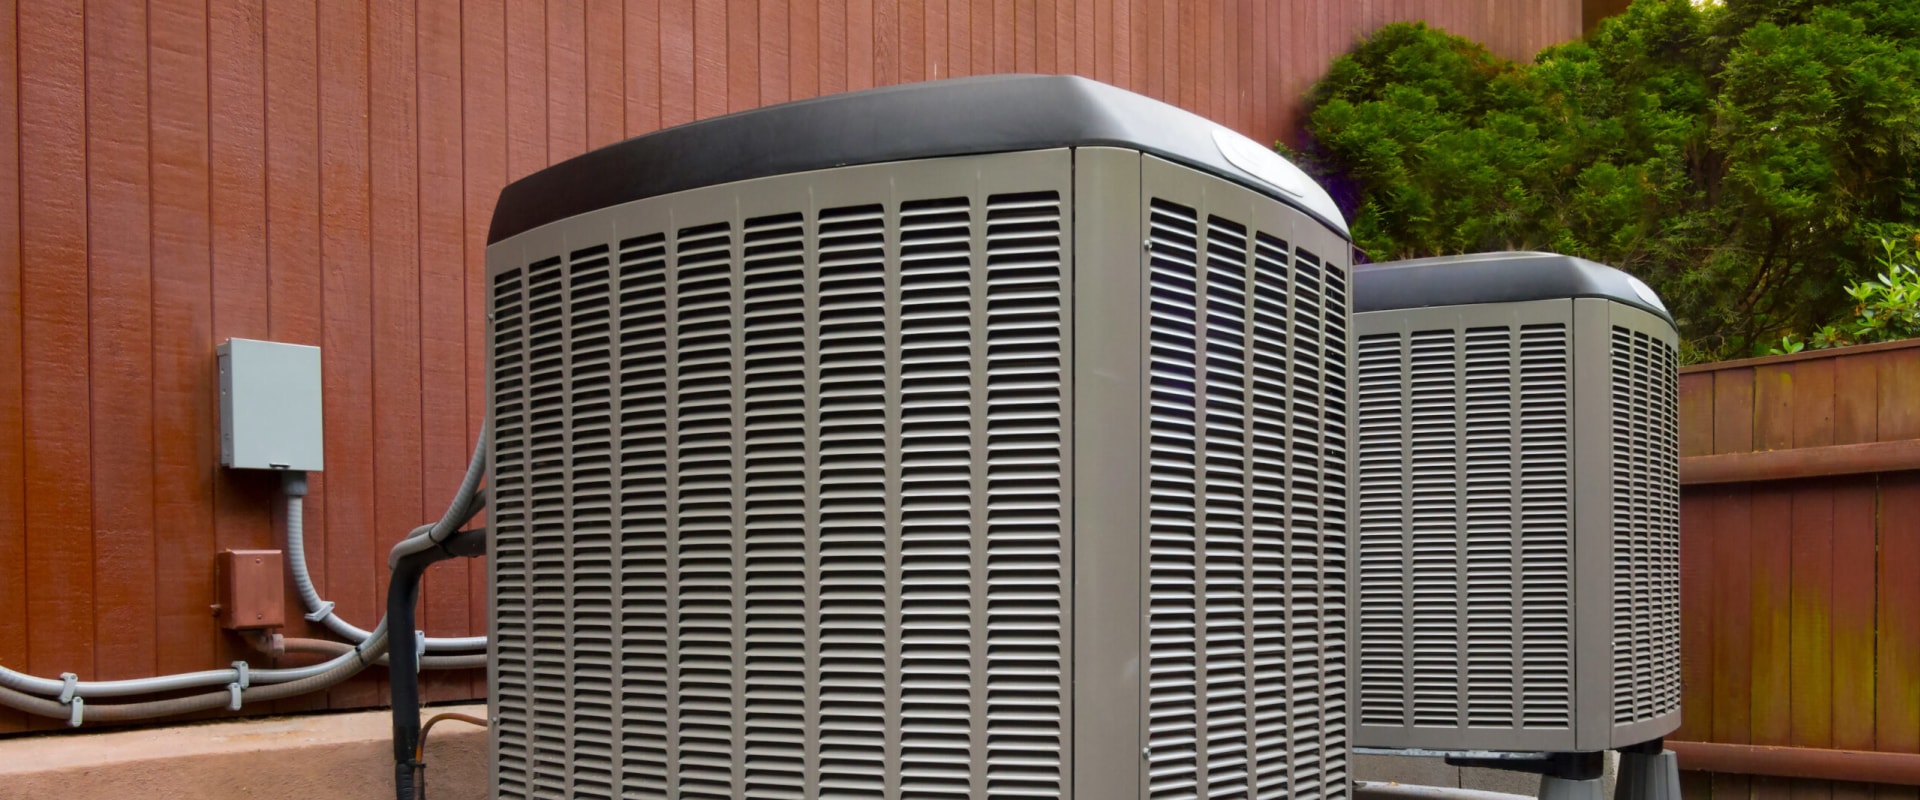 The Top Air Conditioning Brands: An Expert's Guide